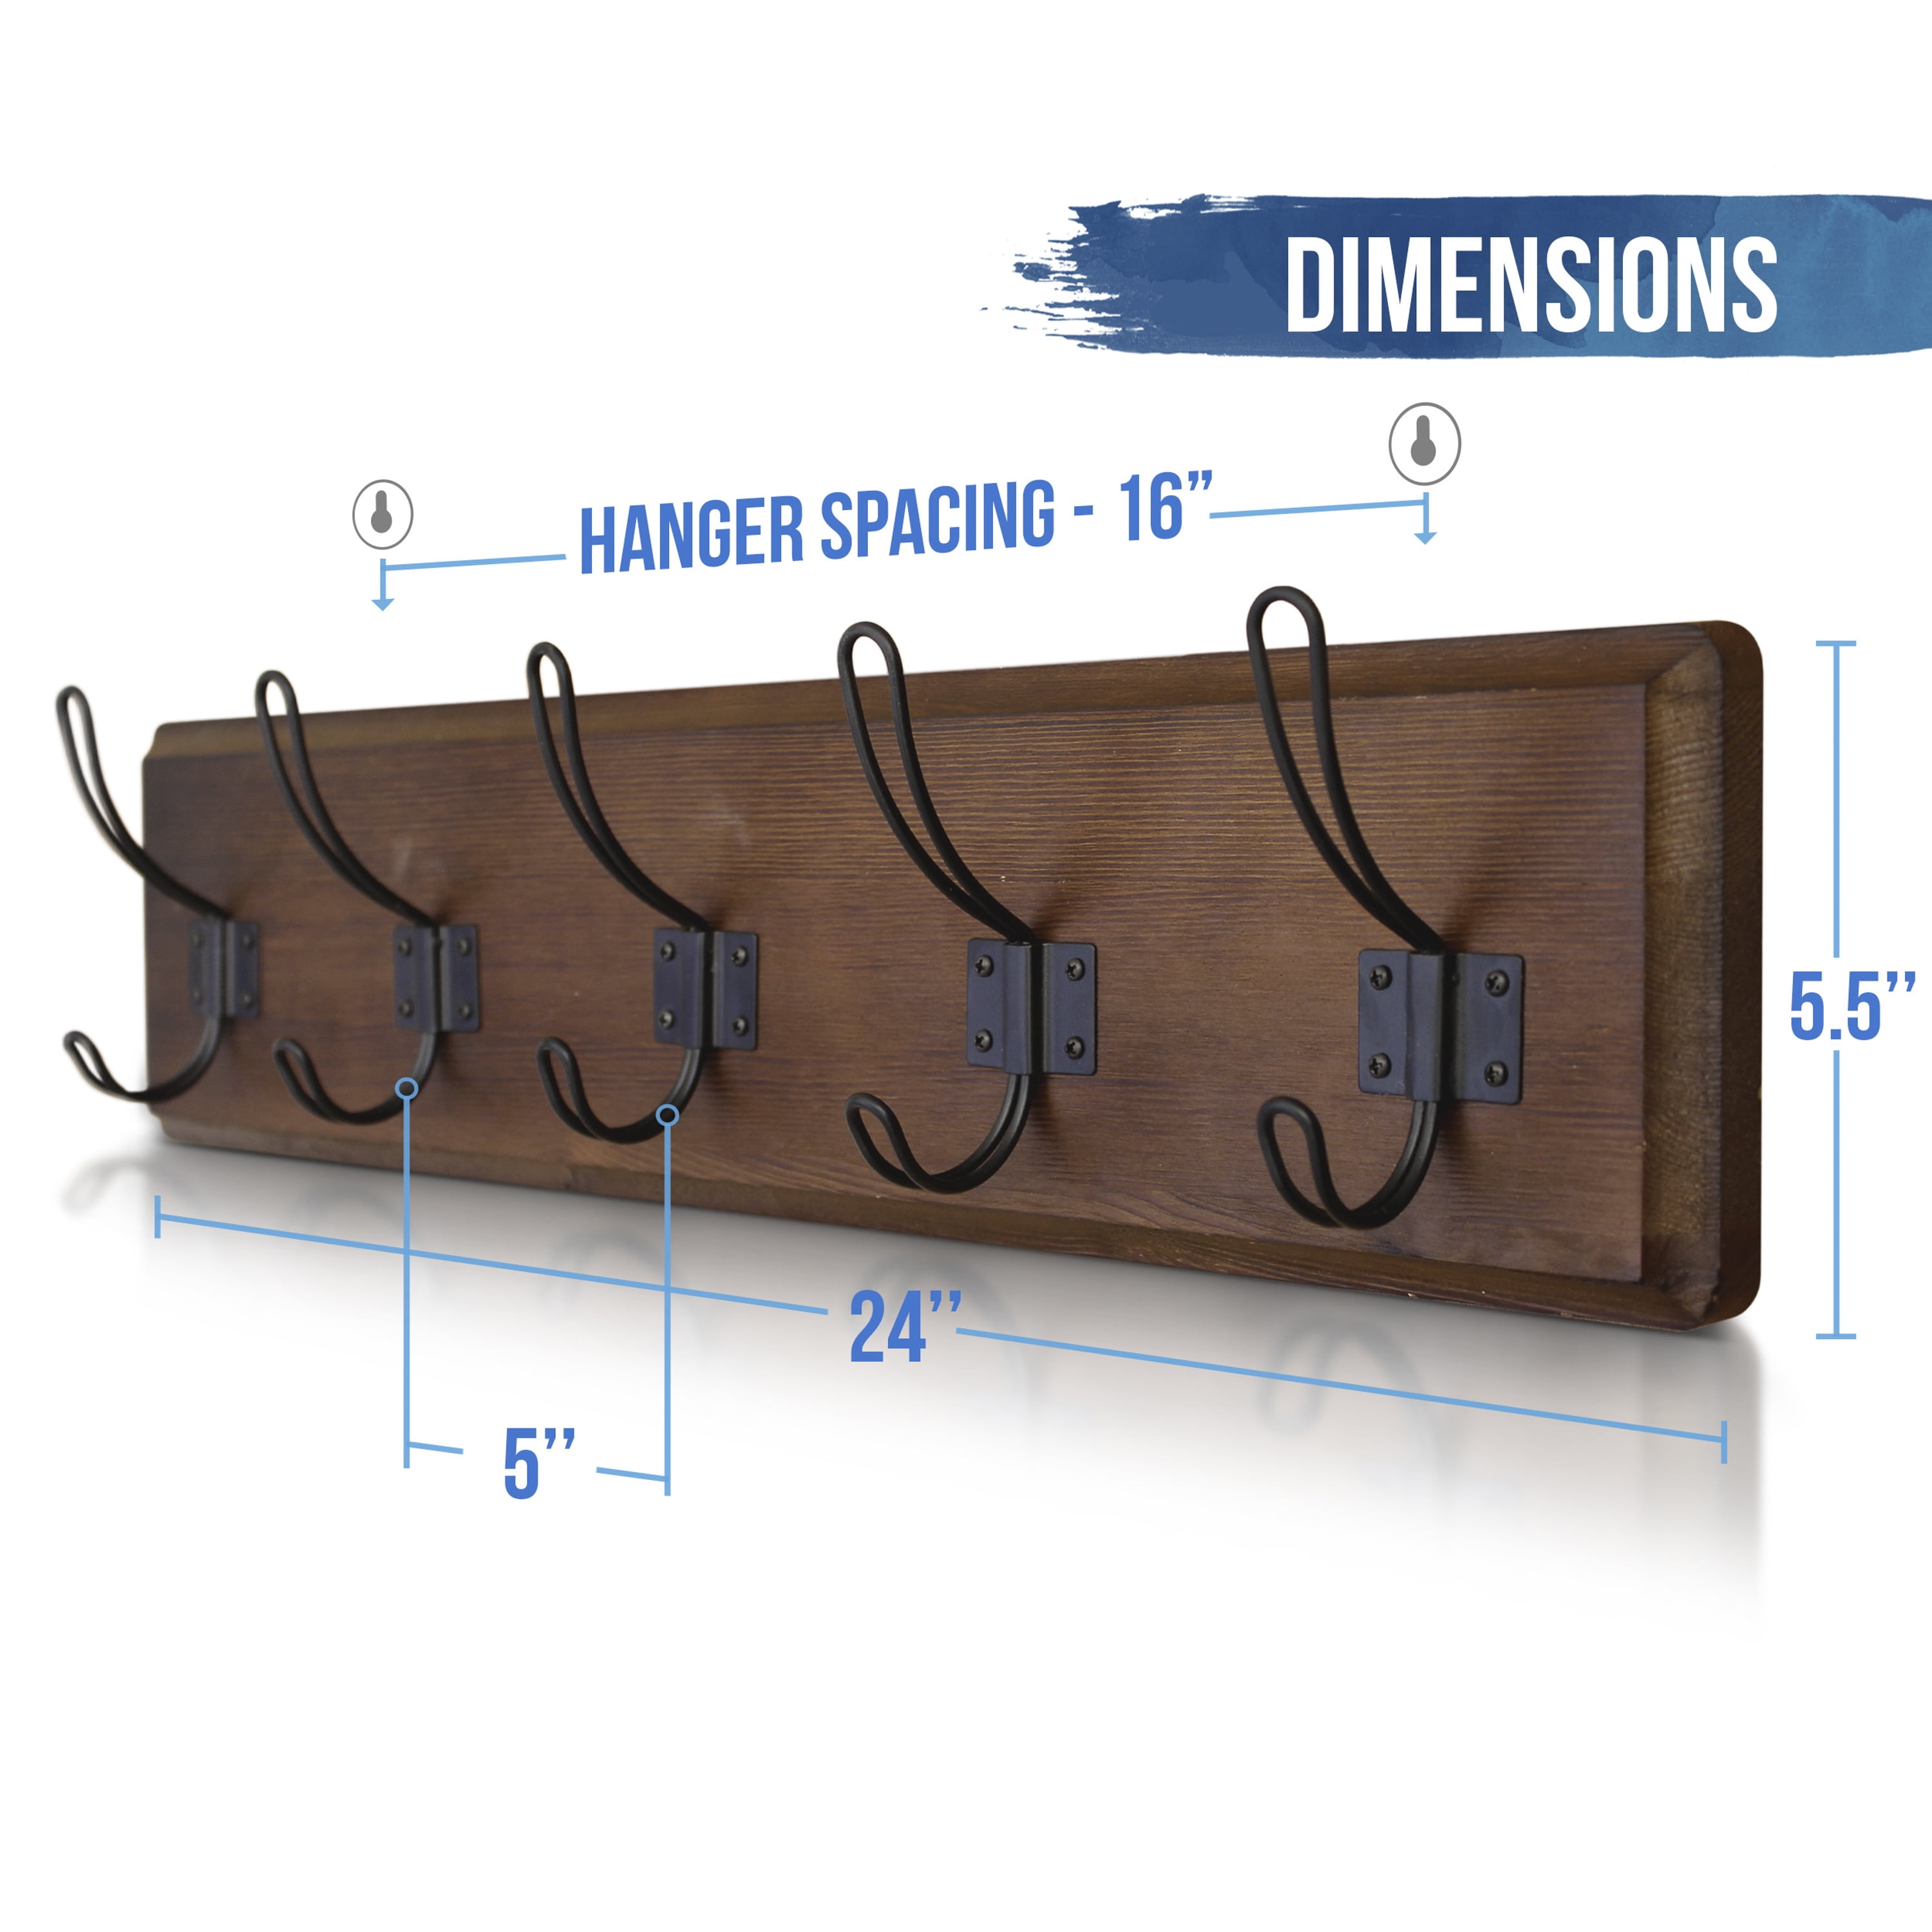 HBCY Creations Rustic Coat Rack - Wall Mounted Whitewash 24 Entryway Coat Hooks - 5 Rustic Hooks, Solid Pine Wood. Perfect Touch for Your Entryway